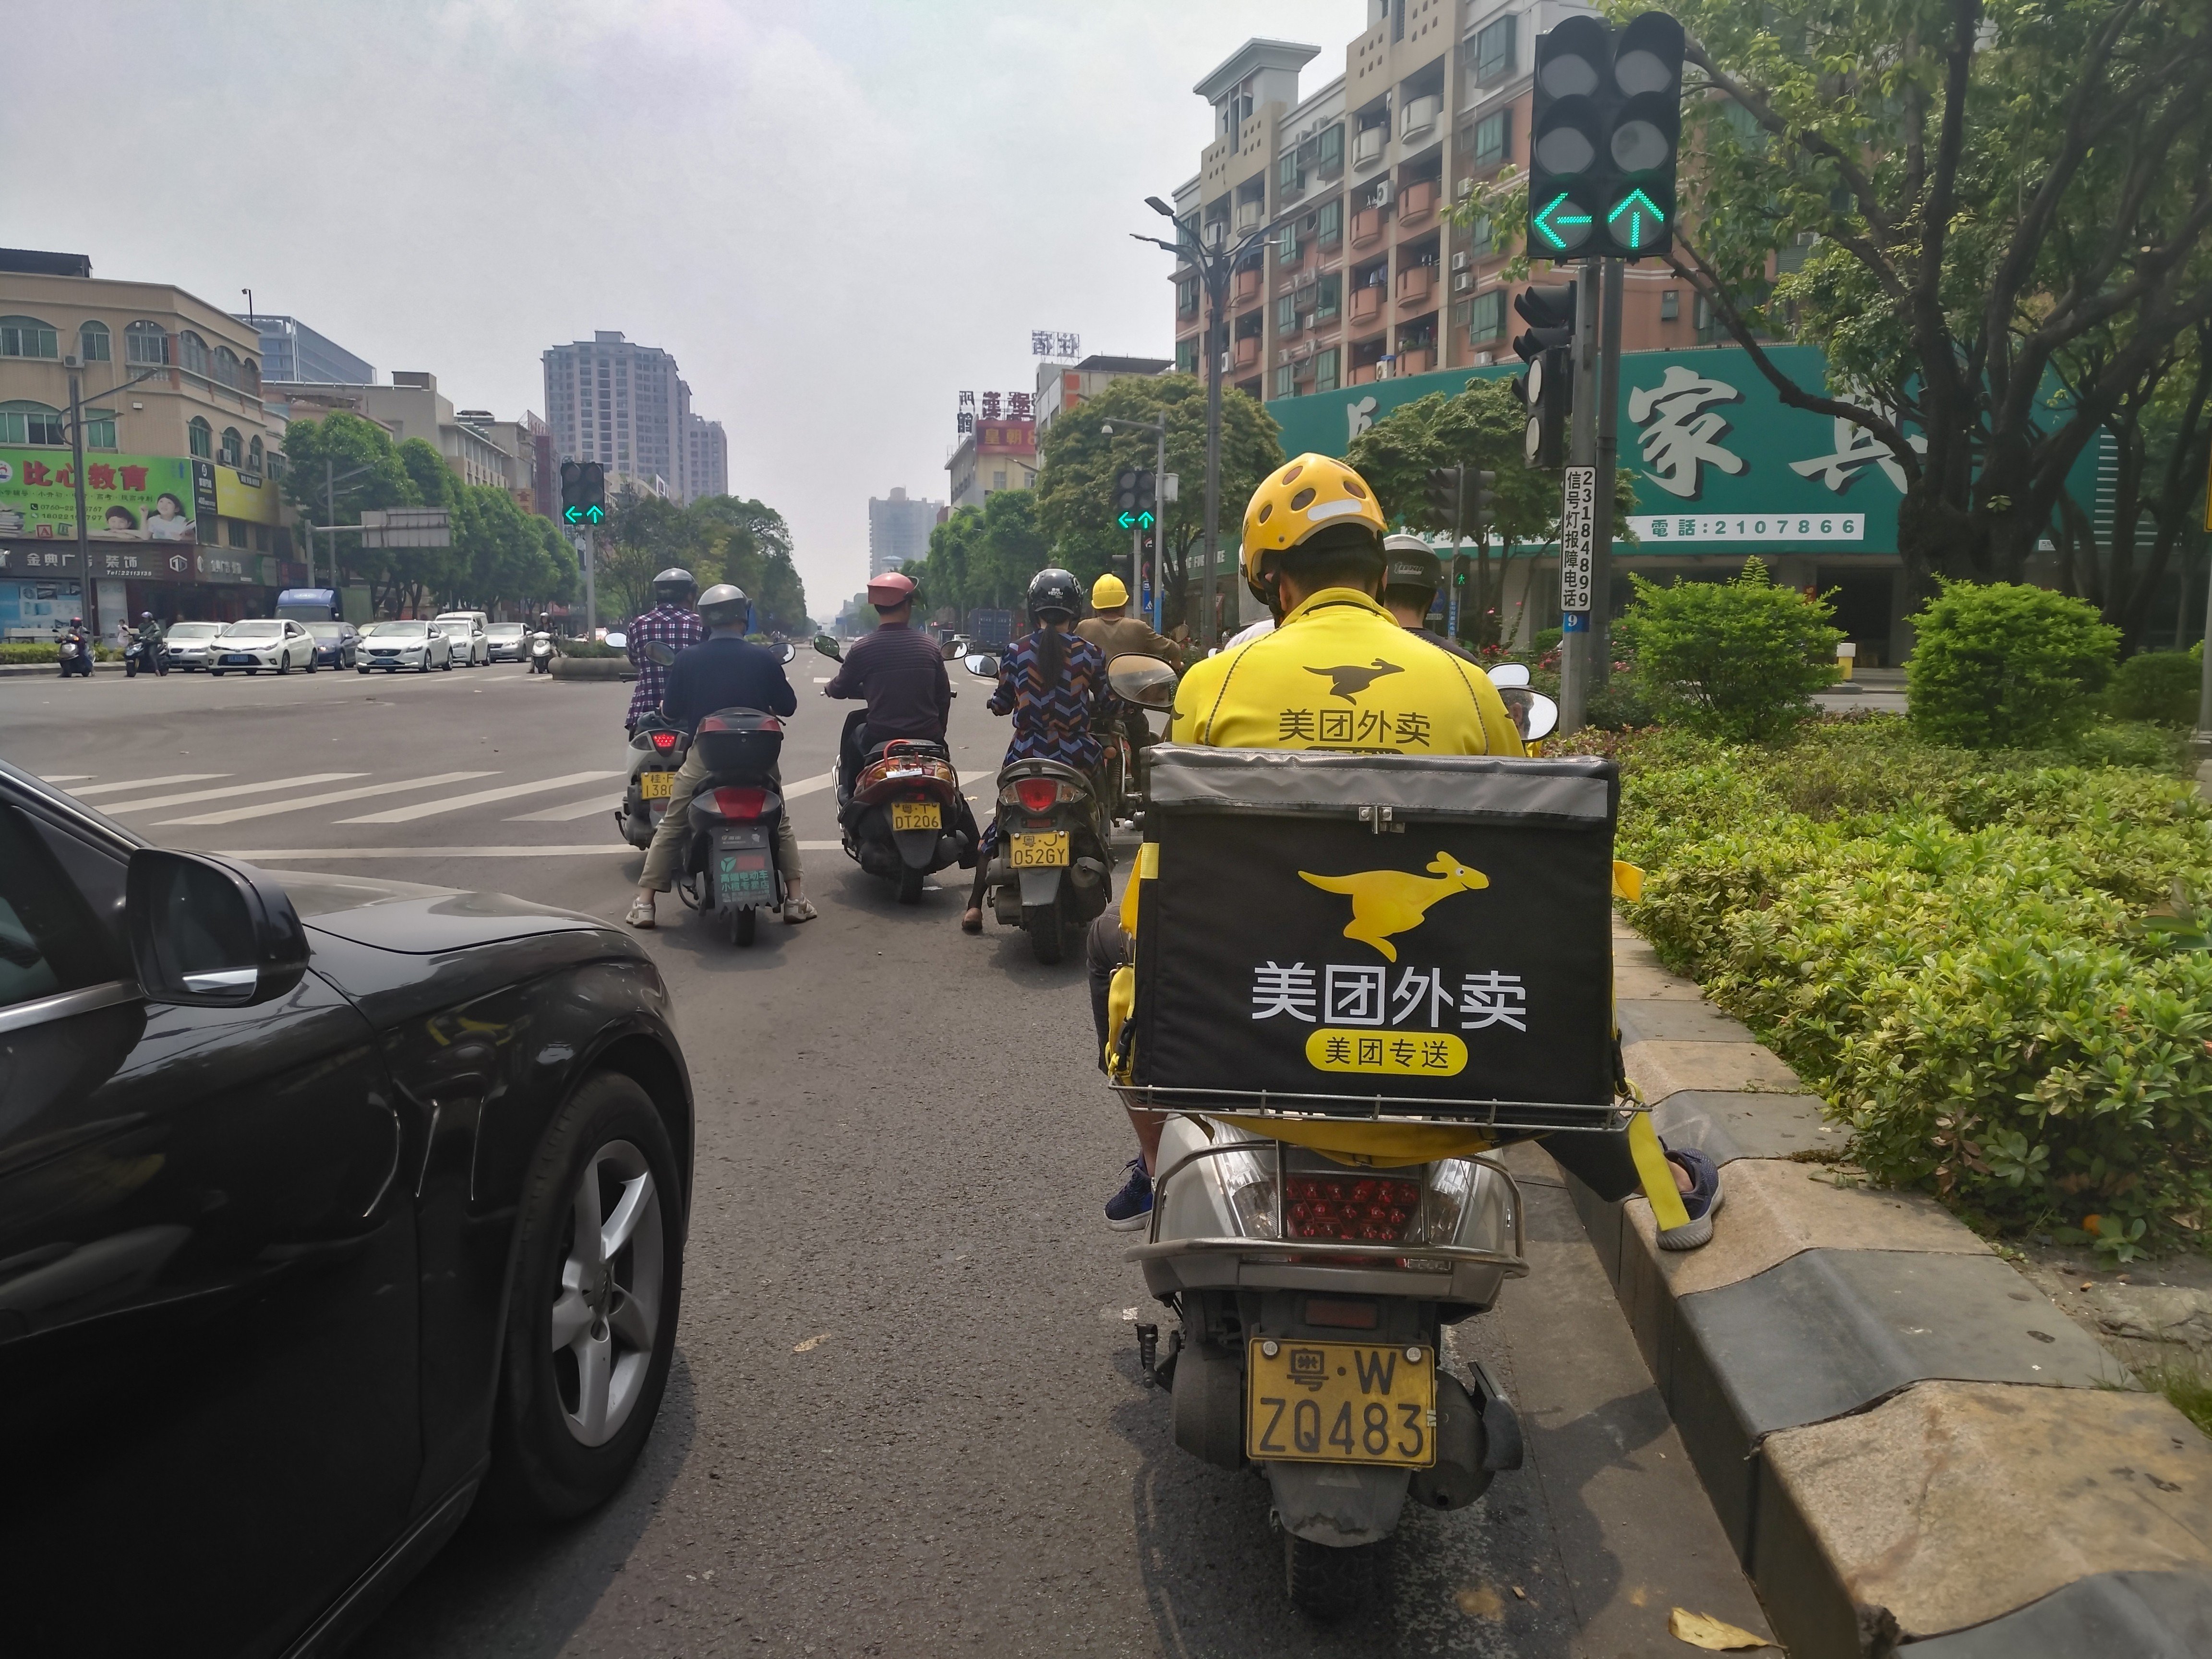 Meituan Dianping food delivery business posted a 70.1 per cent year-on-year increase in revenue to 19.2 billion in the quarter ended March. Photo: Handout